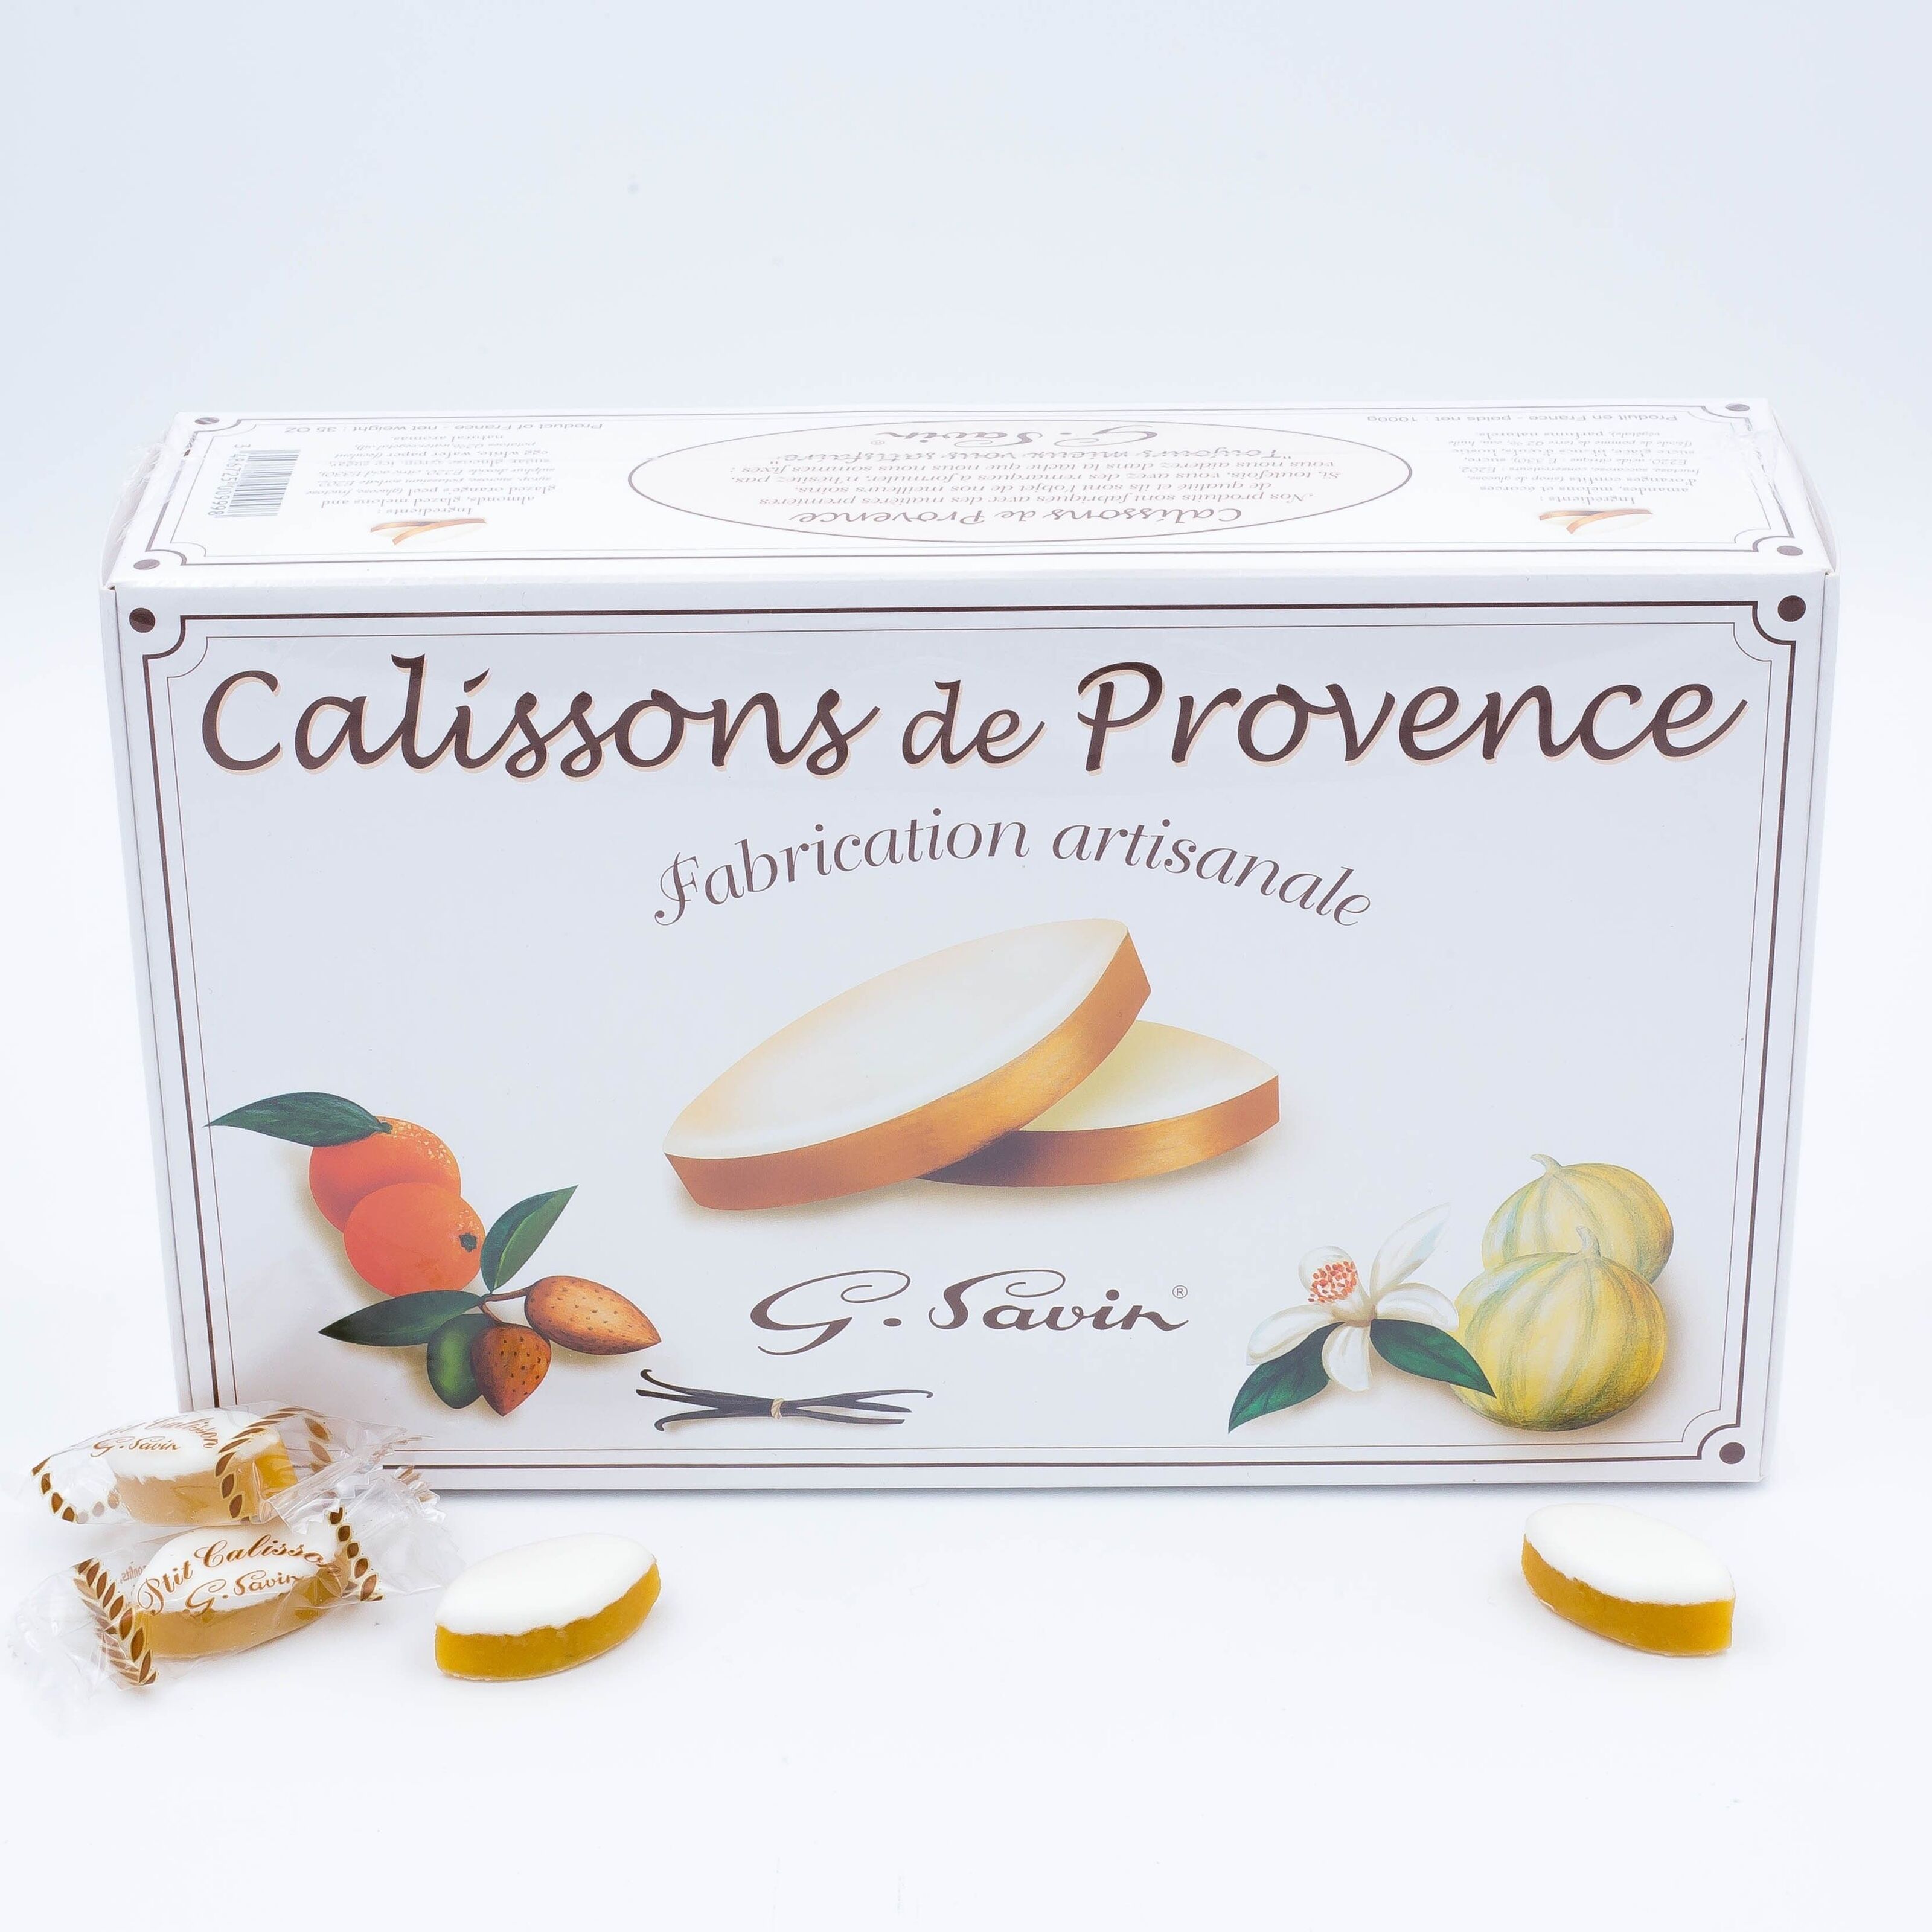 Calissons from Aix en Provence 250g